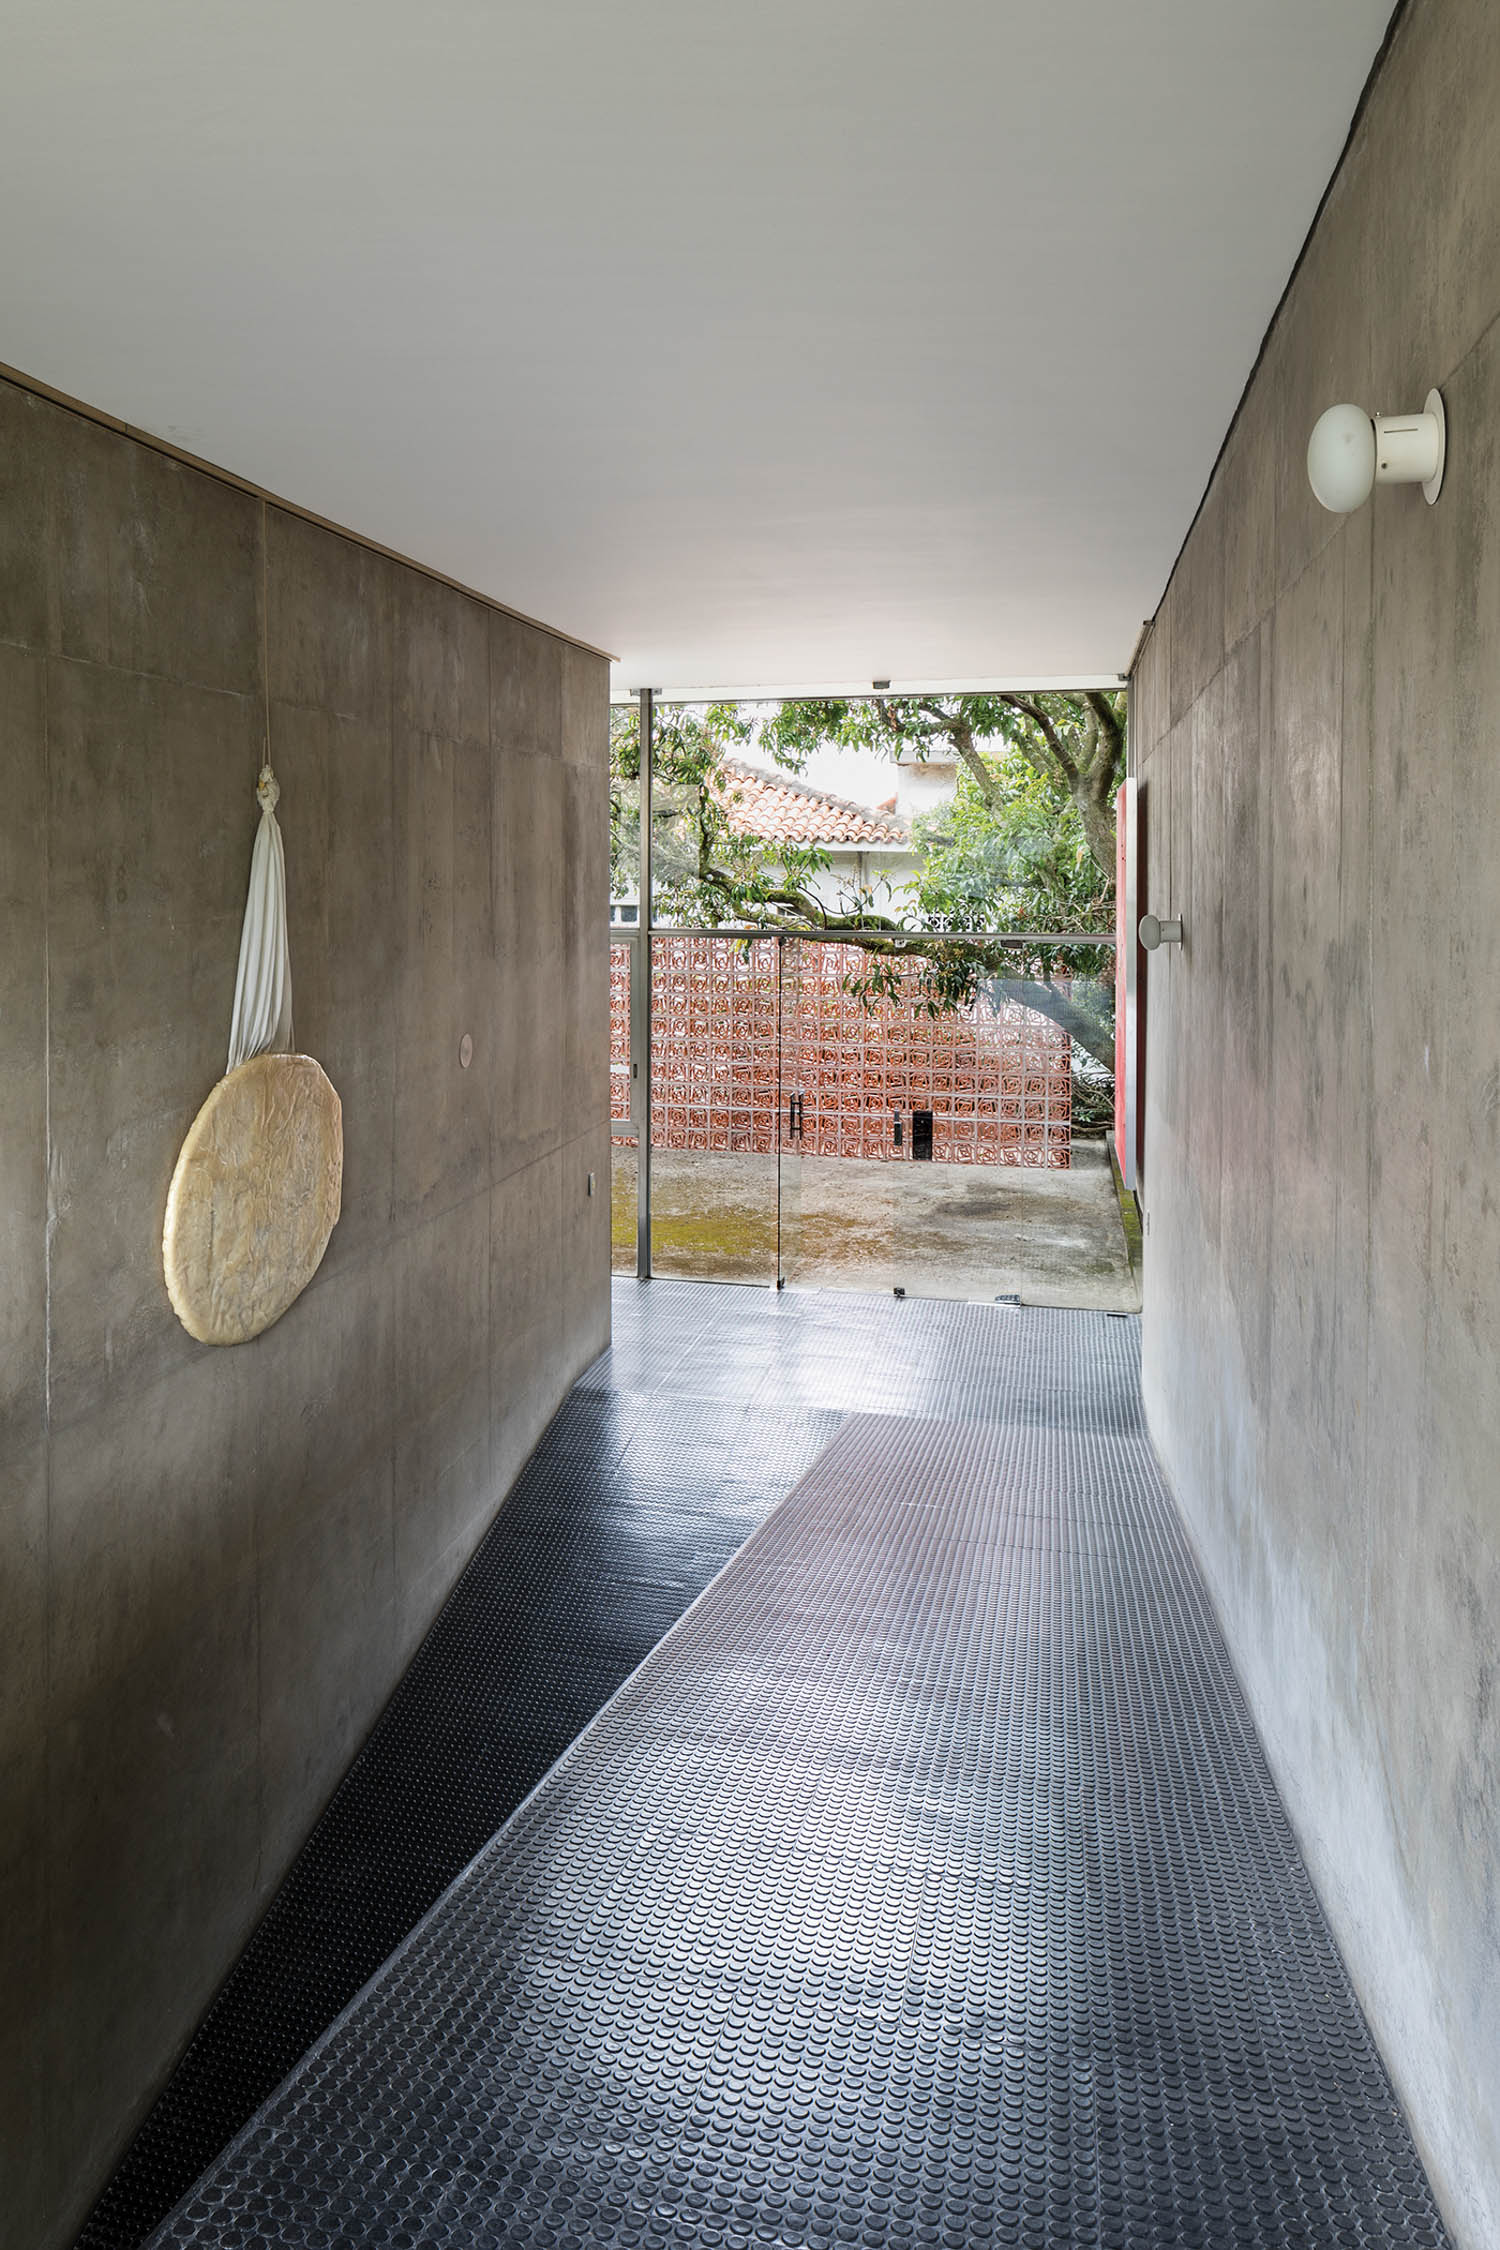 a hallway leads outside in this Brazilian modernist and Brutalist home